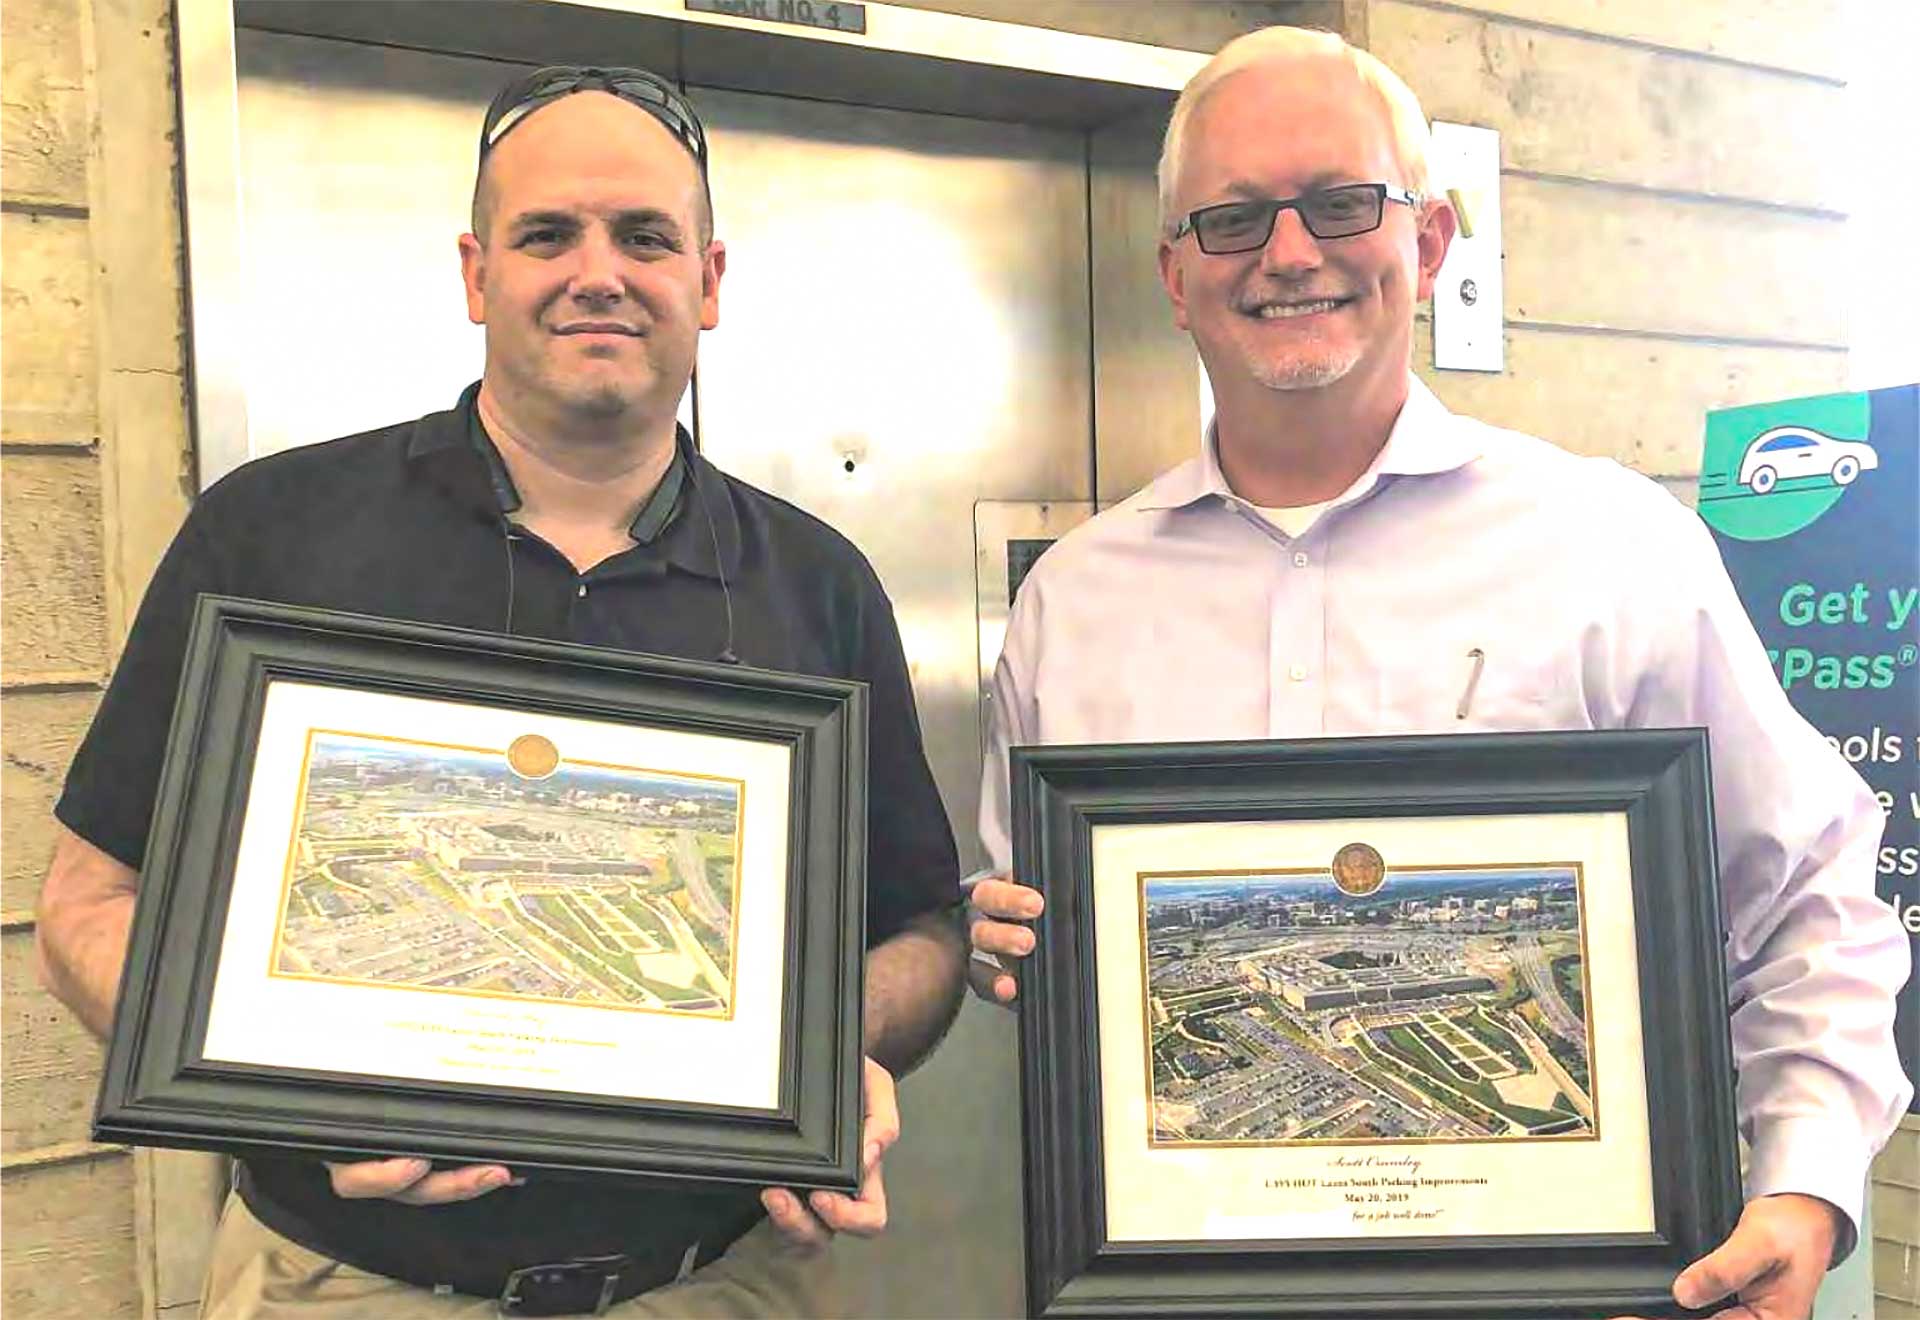 David May and Scott Crumley were recognized with a special picture and plaque at the ceremony by the Pentagon.